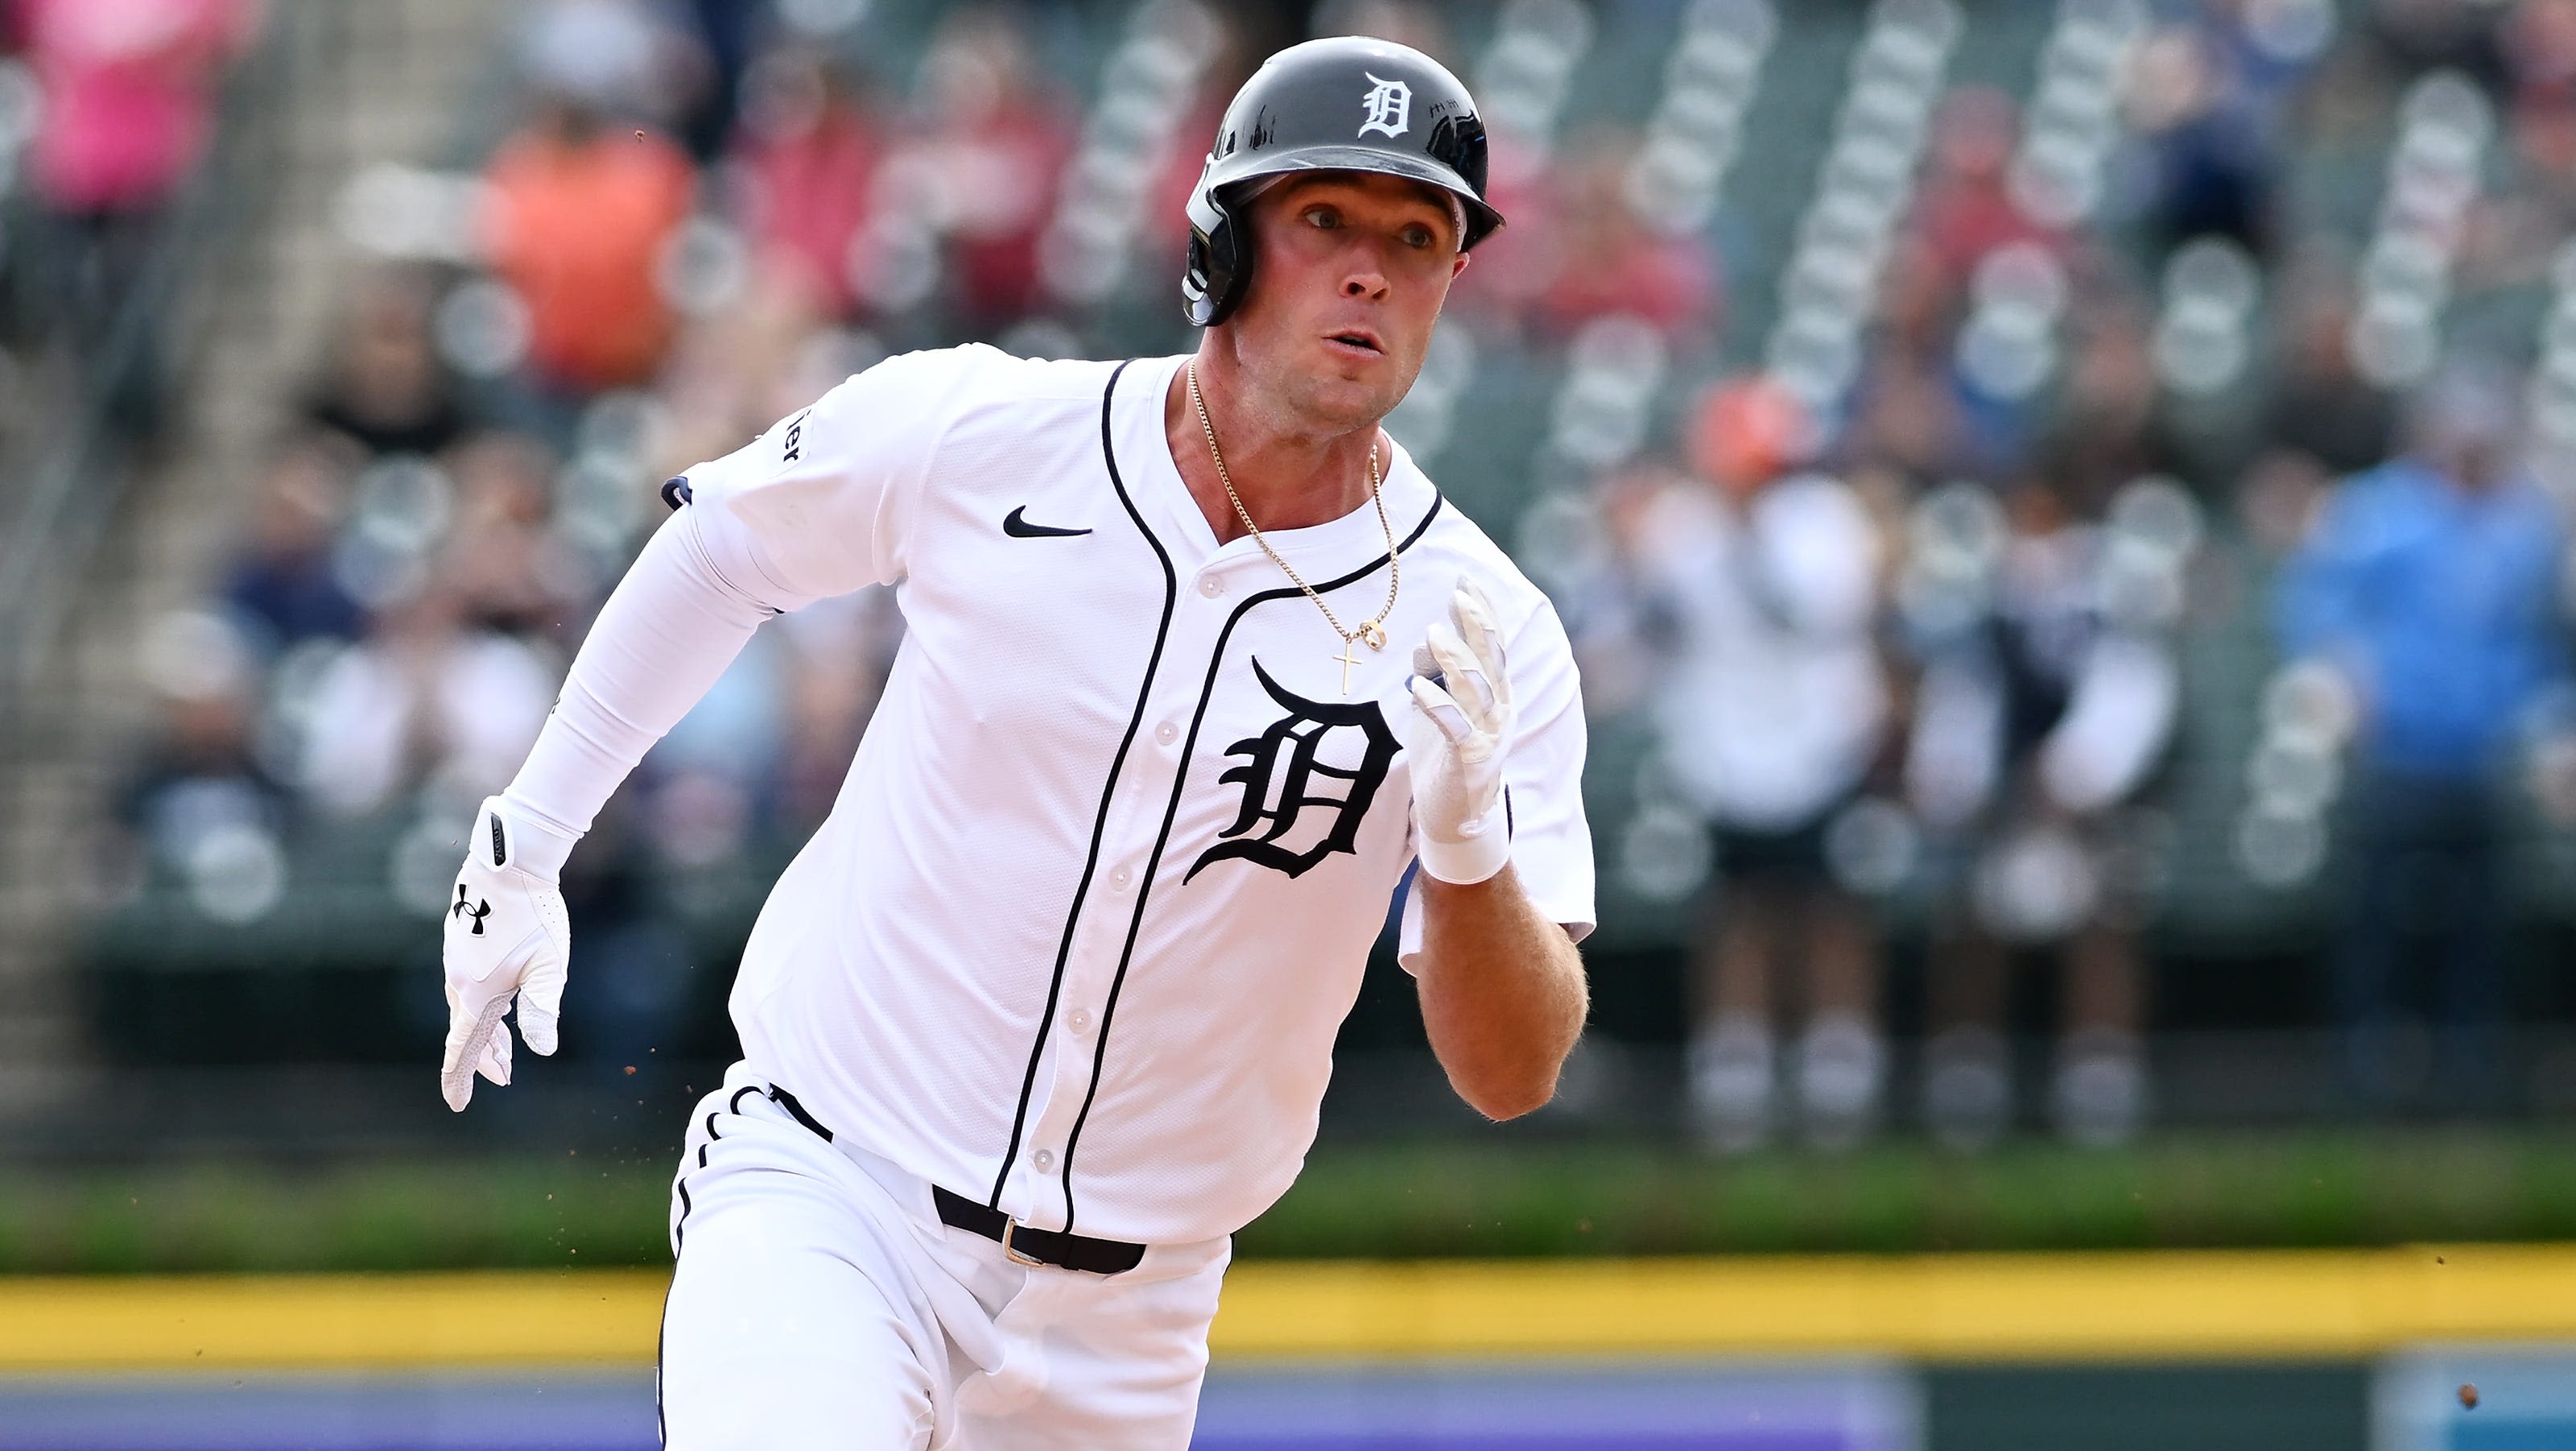 Medical tests reveal lumbar stress fracture for Tigers' Kerry Carpenter